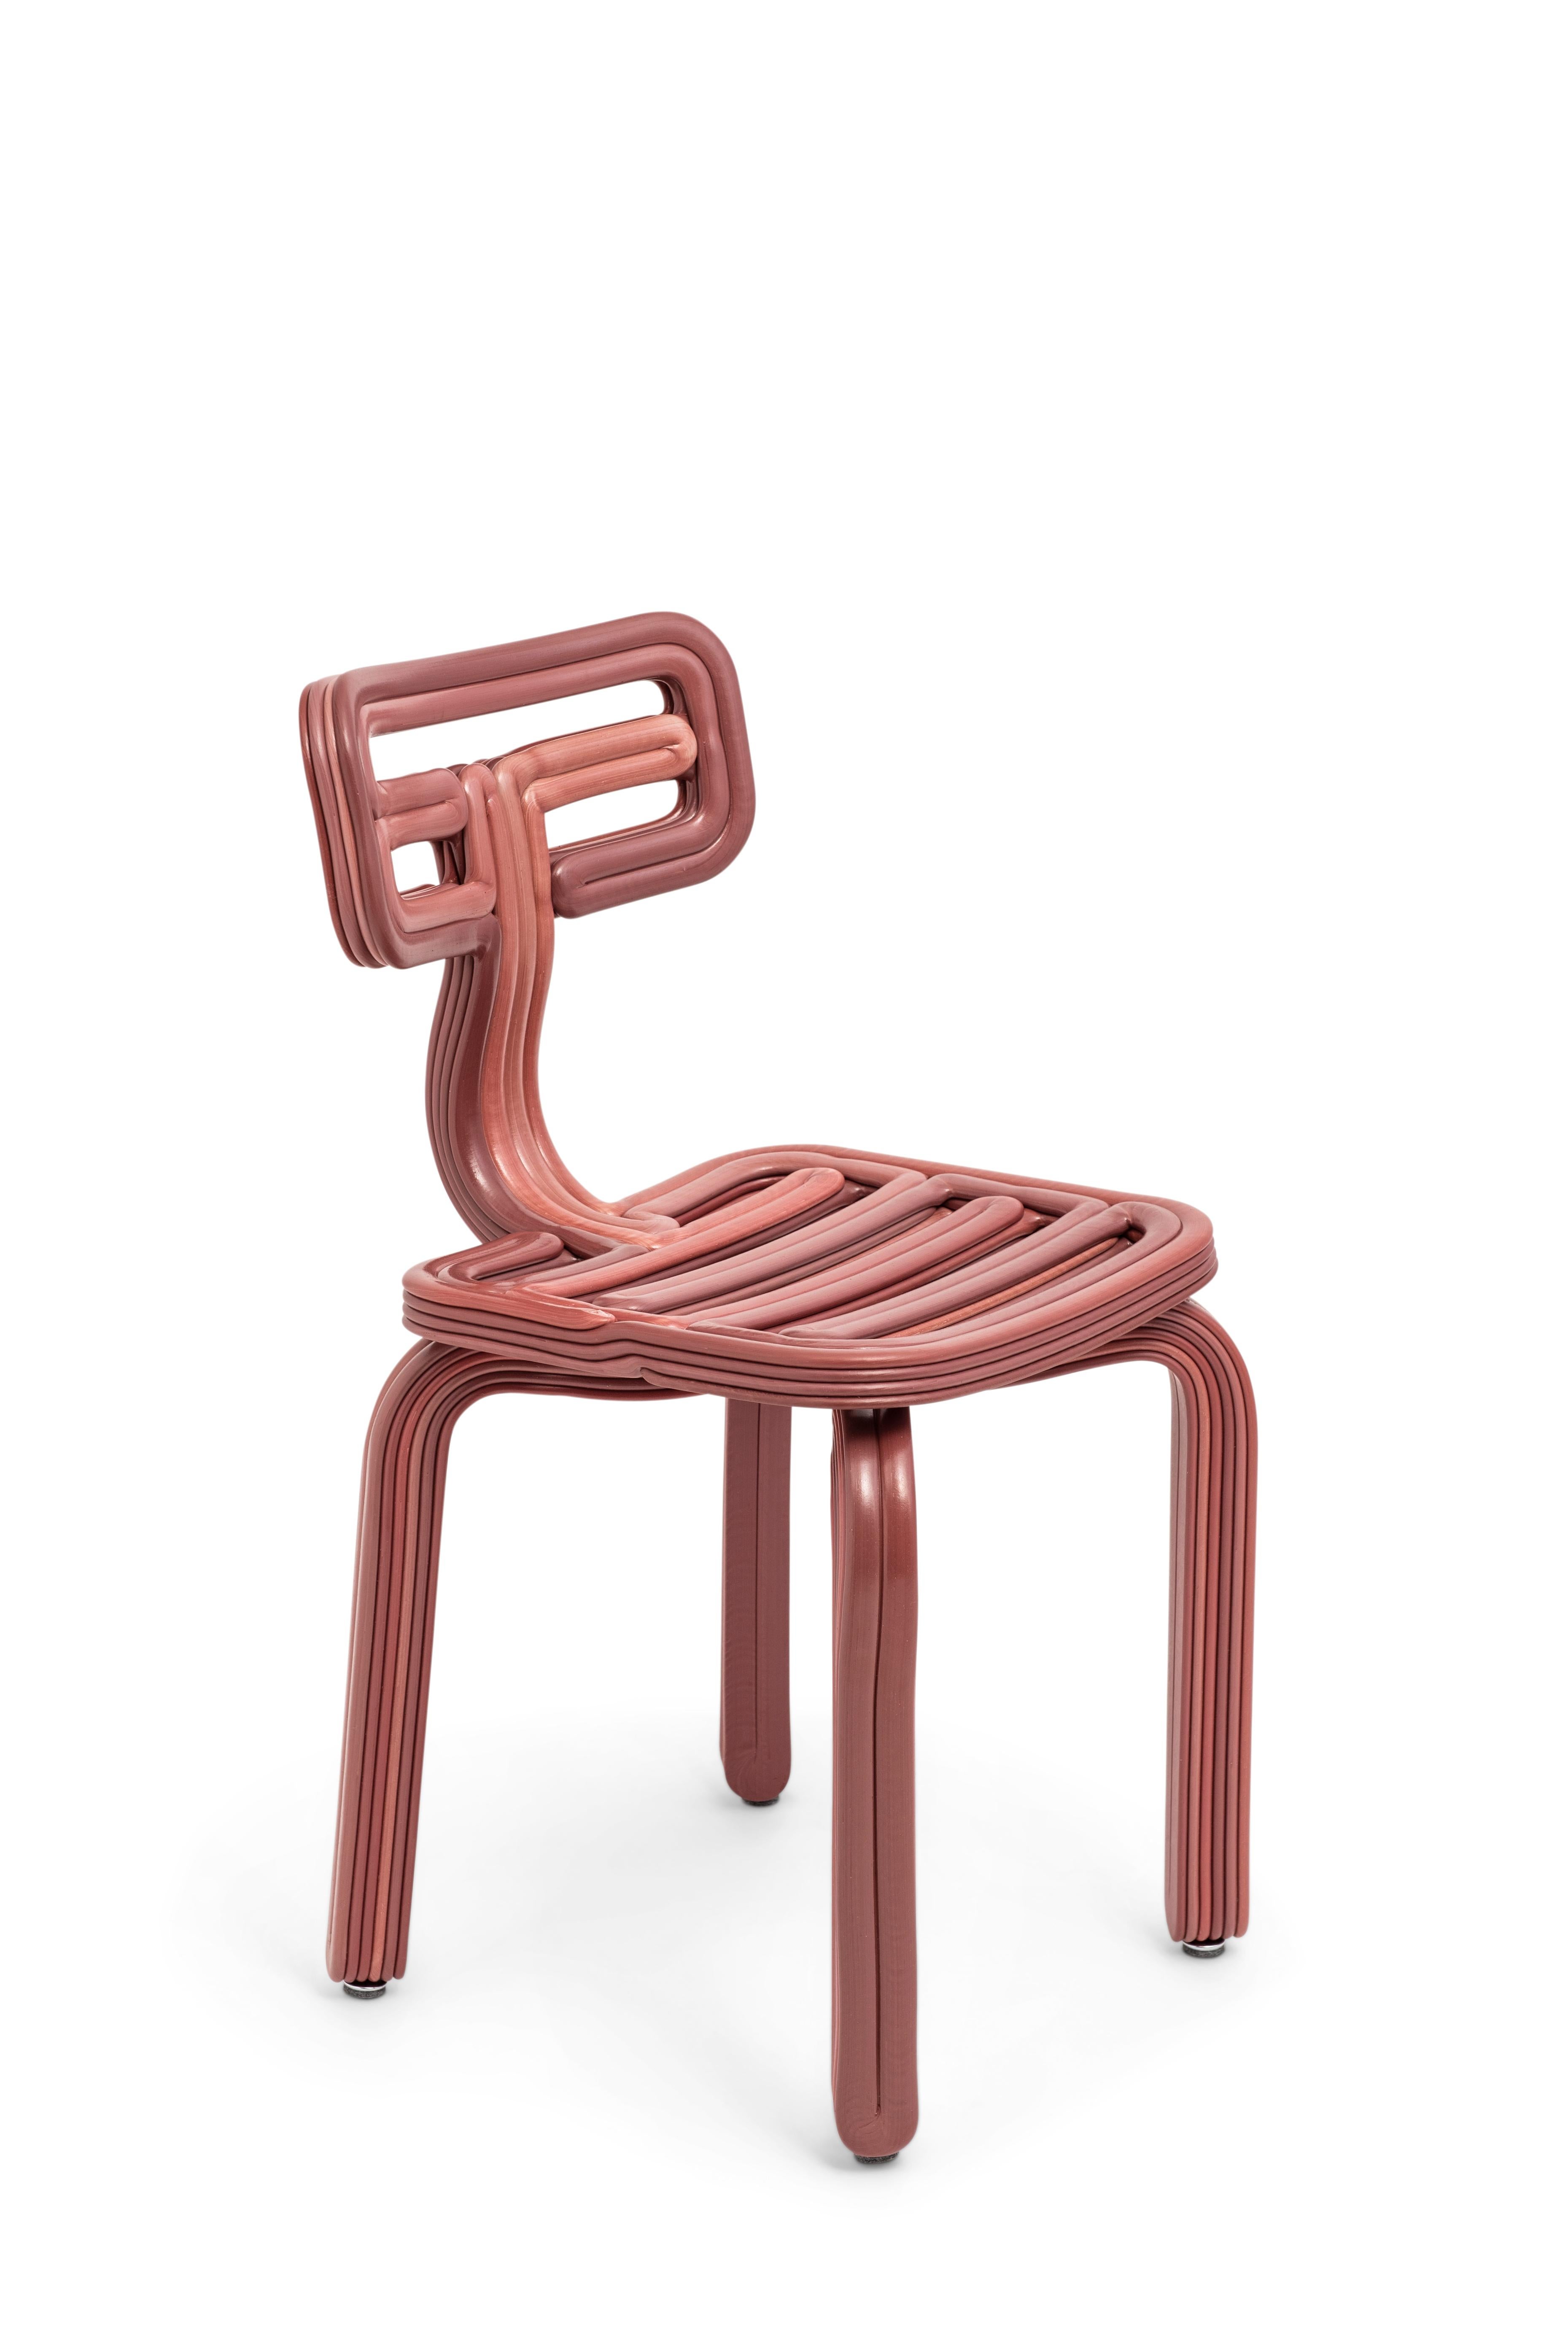 Dirk van der Kooij first fell in love with low resolution 3D printing as a student, fulfilling his search for honest and functional ornamentation. The chubby chair remains his most playful child of this process, which finds its alien form through